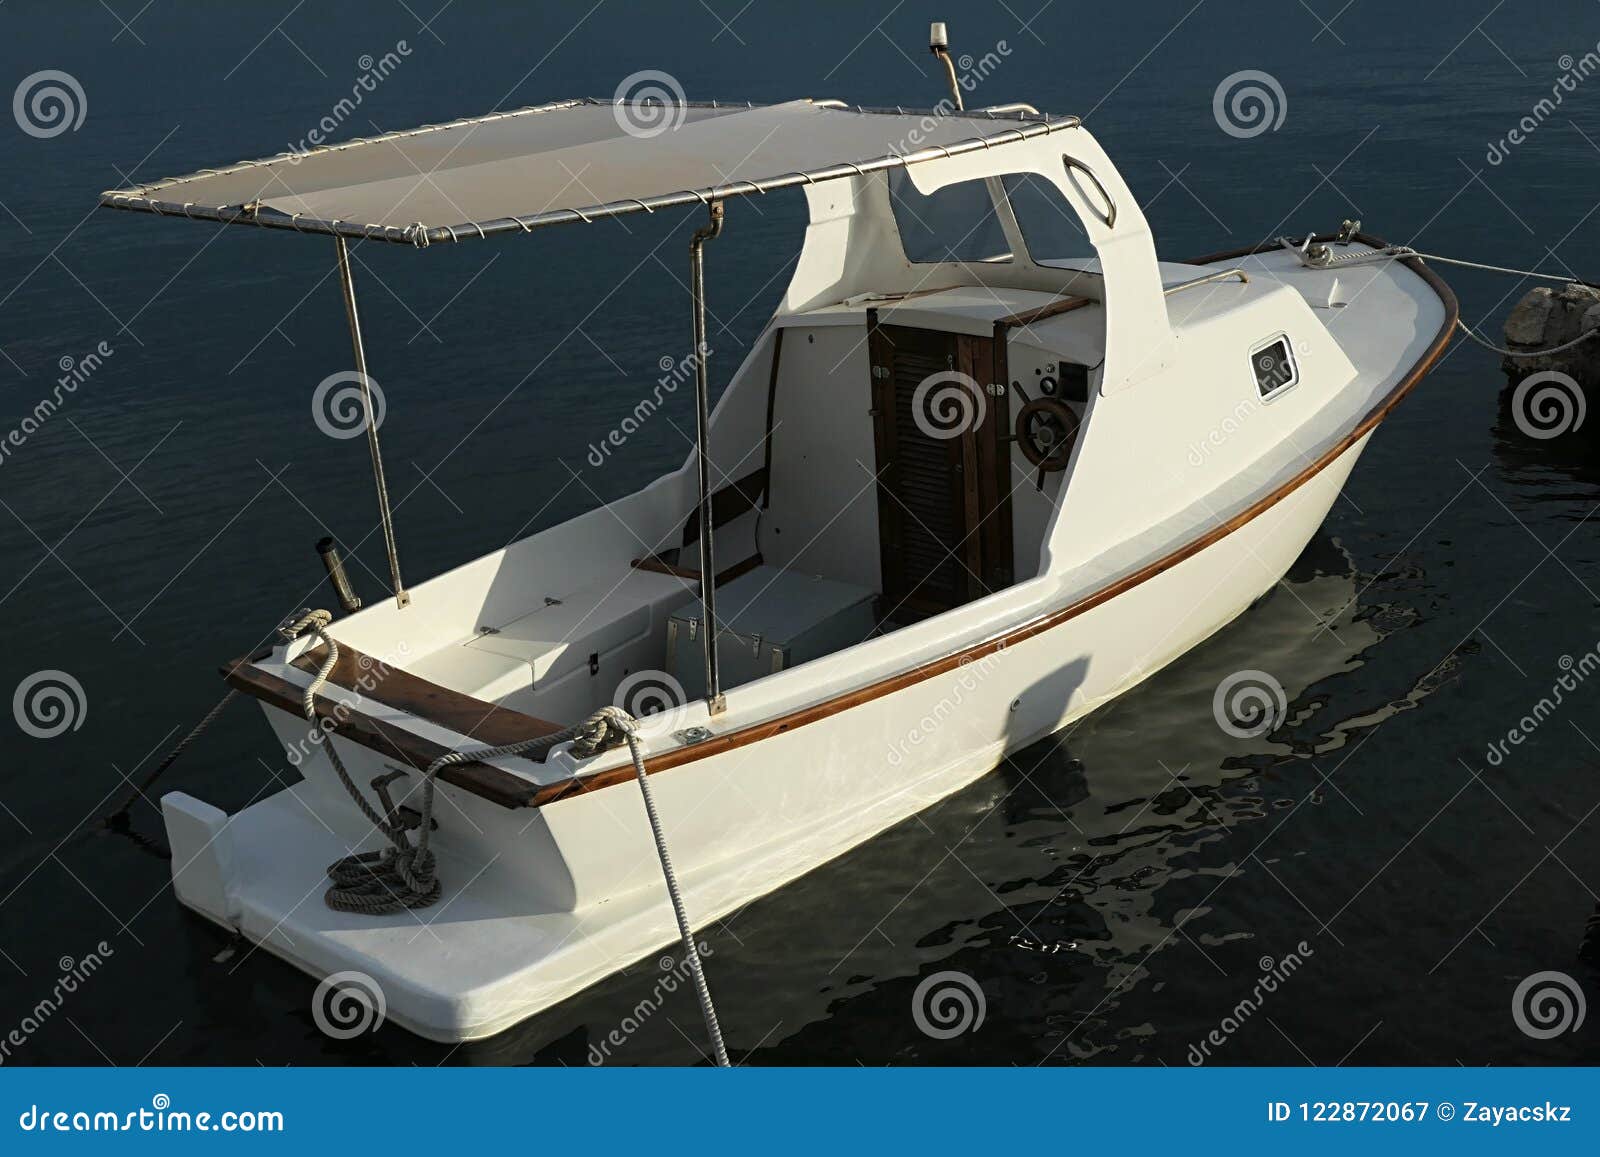 Small White Motor Fishing Boat with Wooden Helm, Simple Small